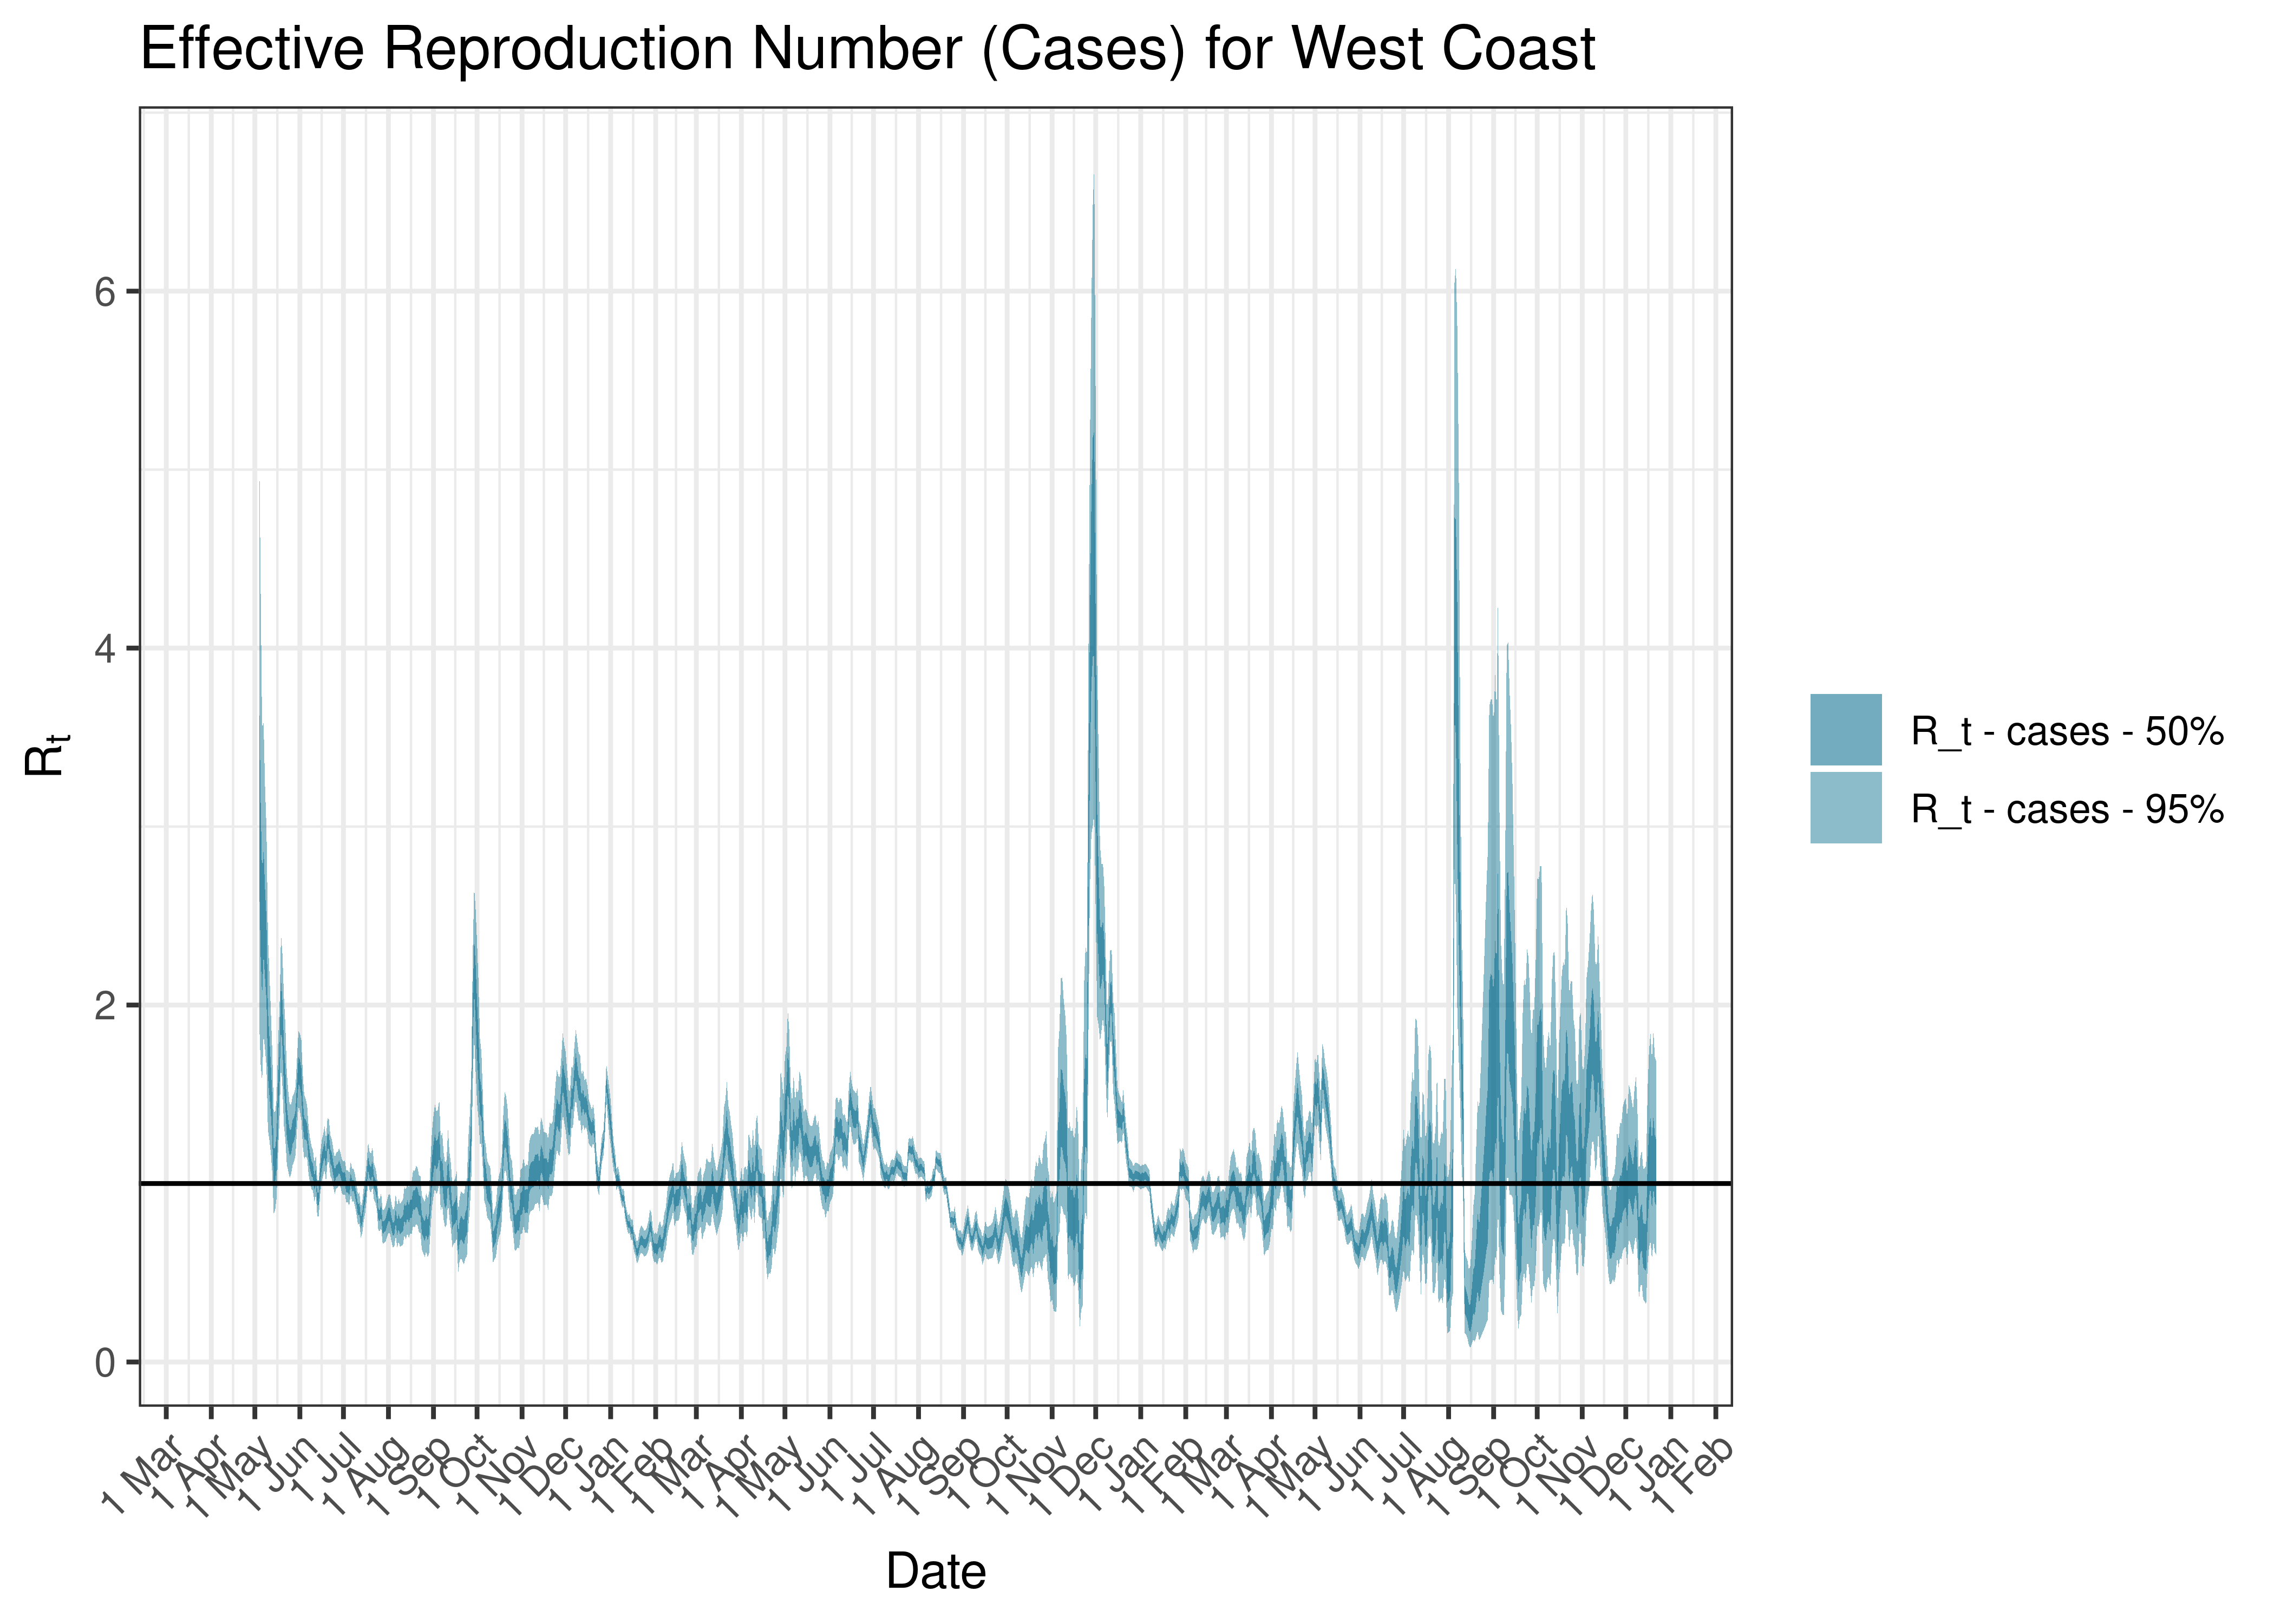 Estimated Effective Reproduction Number Based on Cases for West Coast since 1 April 2020